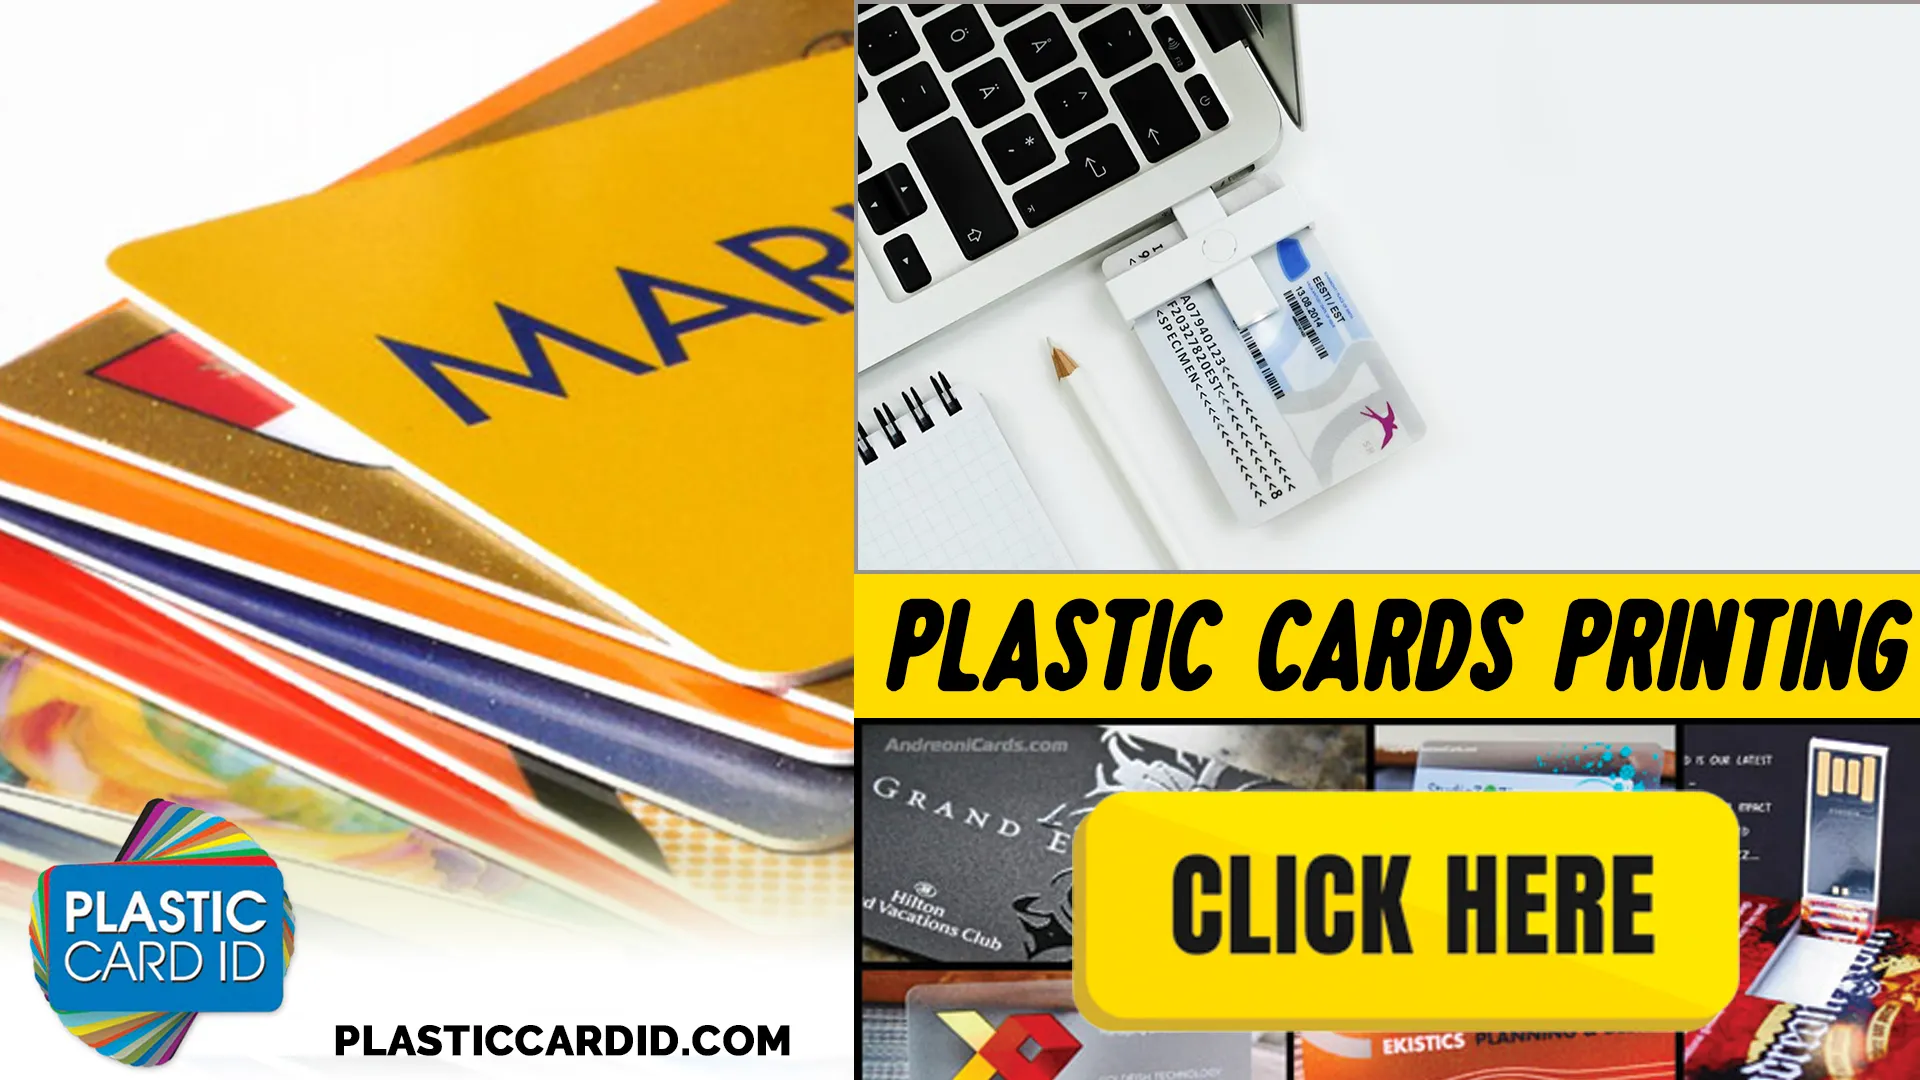 The Process Behind Plastic Card ID
's Exceptional Card Printing